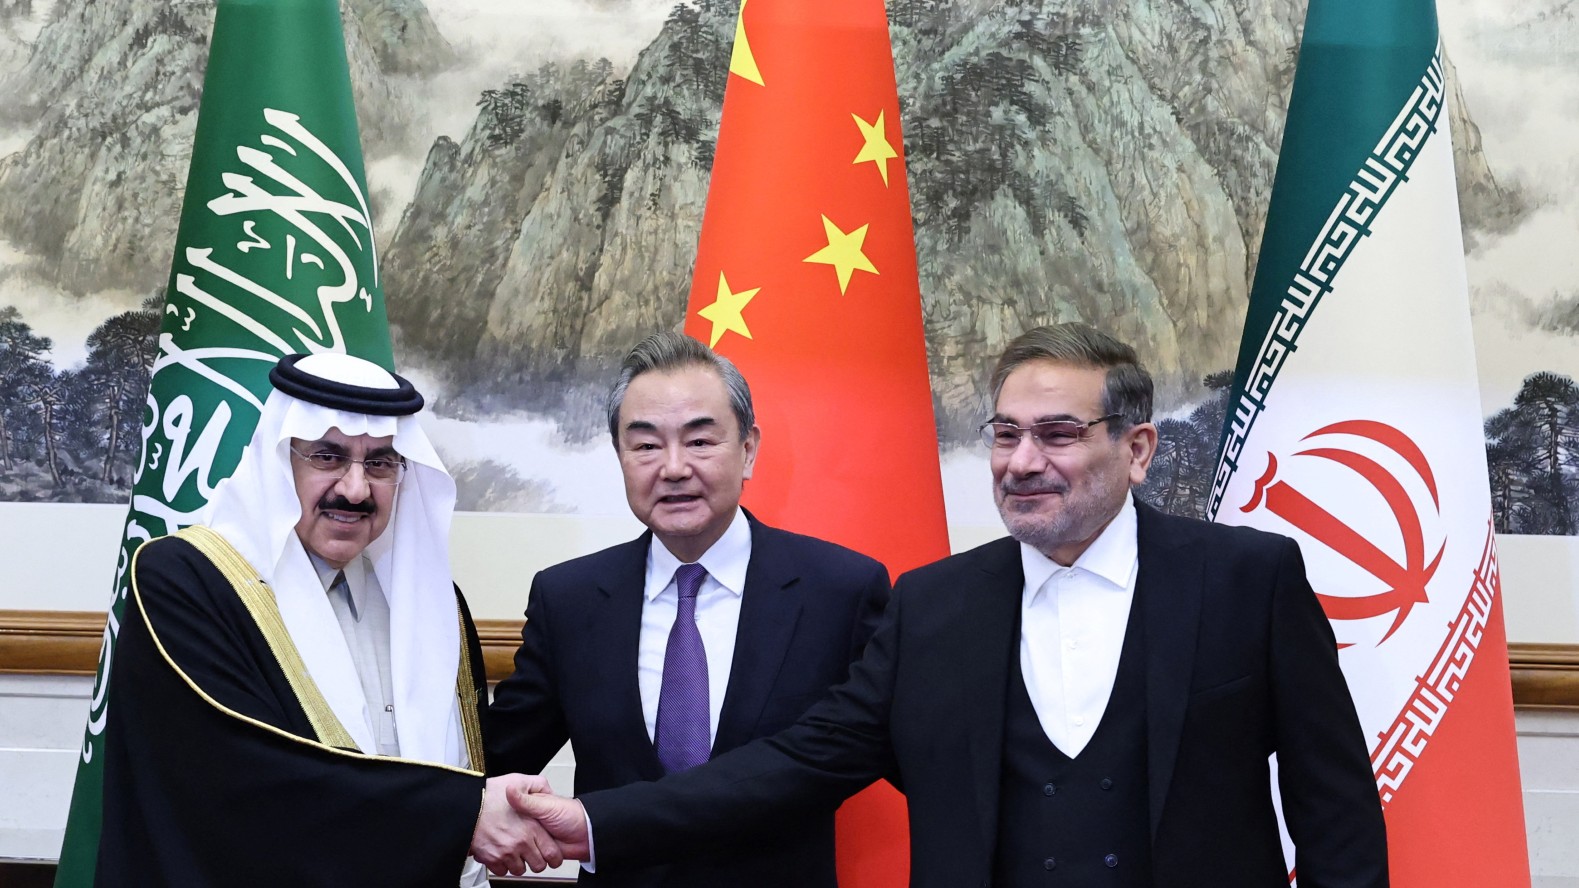 (L-R) Saudi Arabia's National Security Adviser Musaad bin Mohammed al-Aiban, China's Wang Yi, Ali Shamkhani of Iran’s Supreme National Security Council during a meeting in Beijing, 10 March 2023 (Reuters)